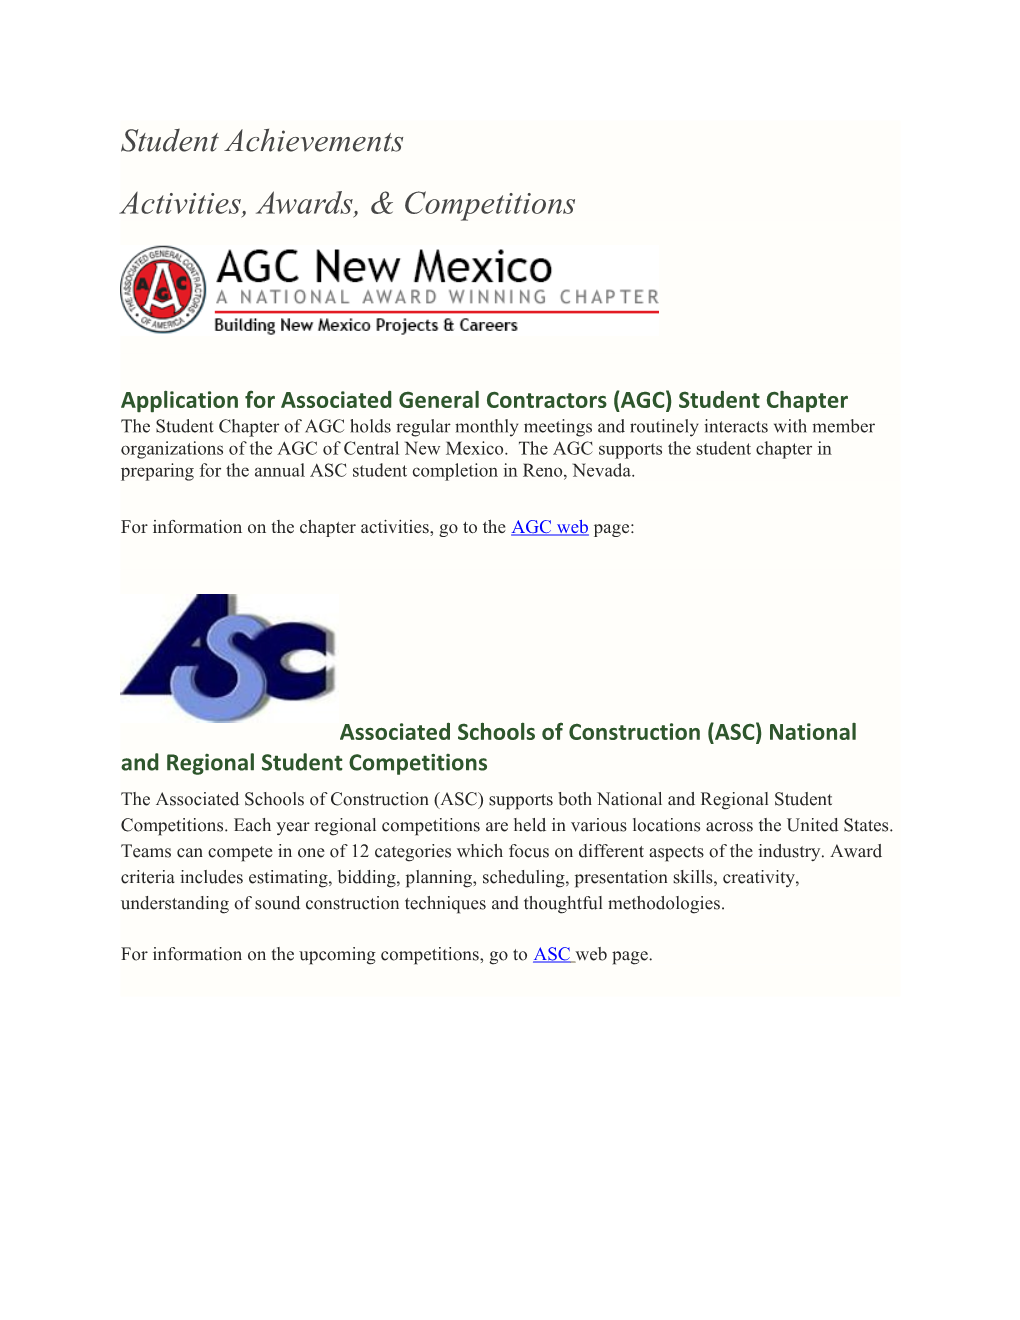 Application for Associated General Contractors (AGC) Student Chapter